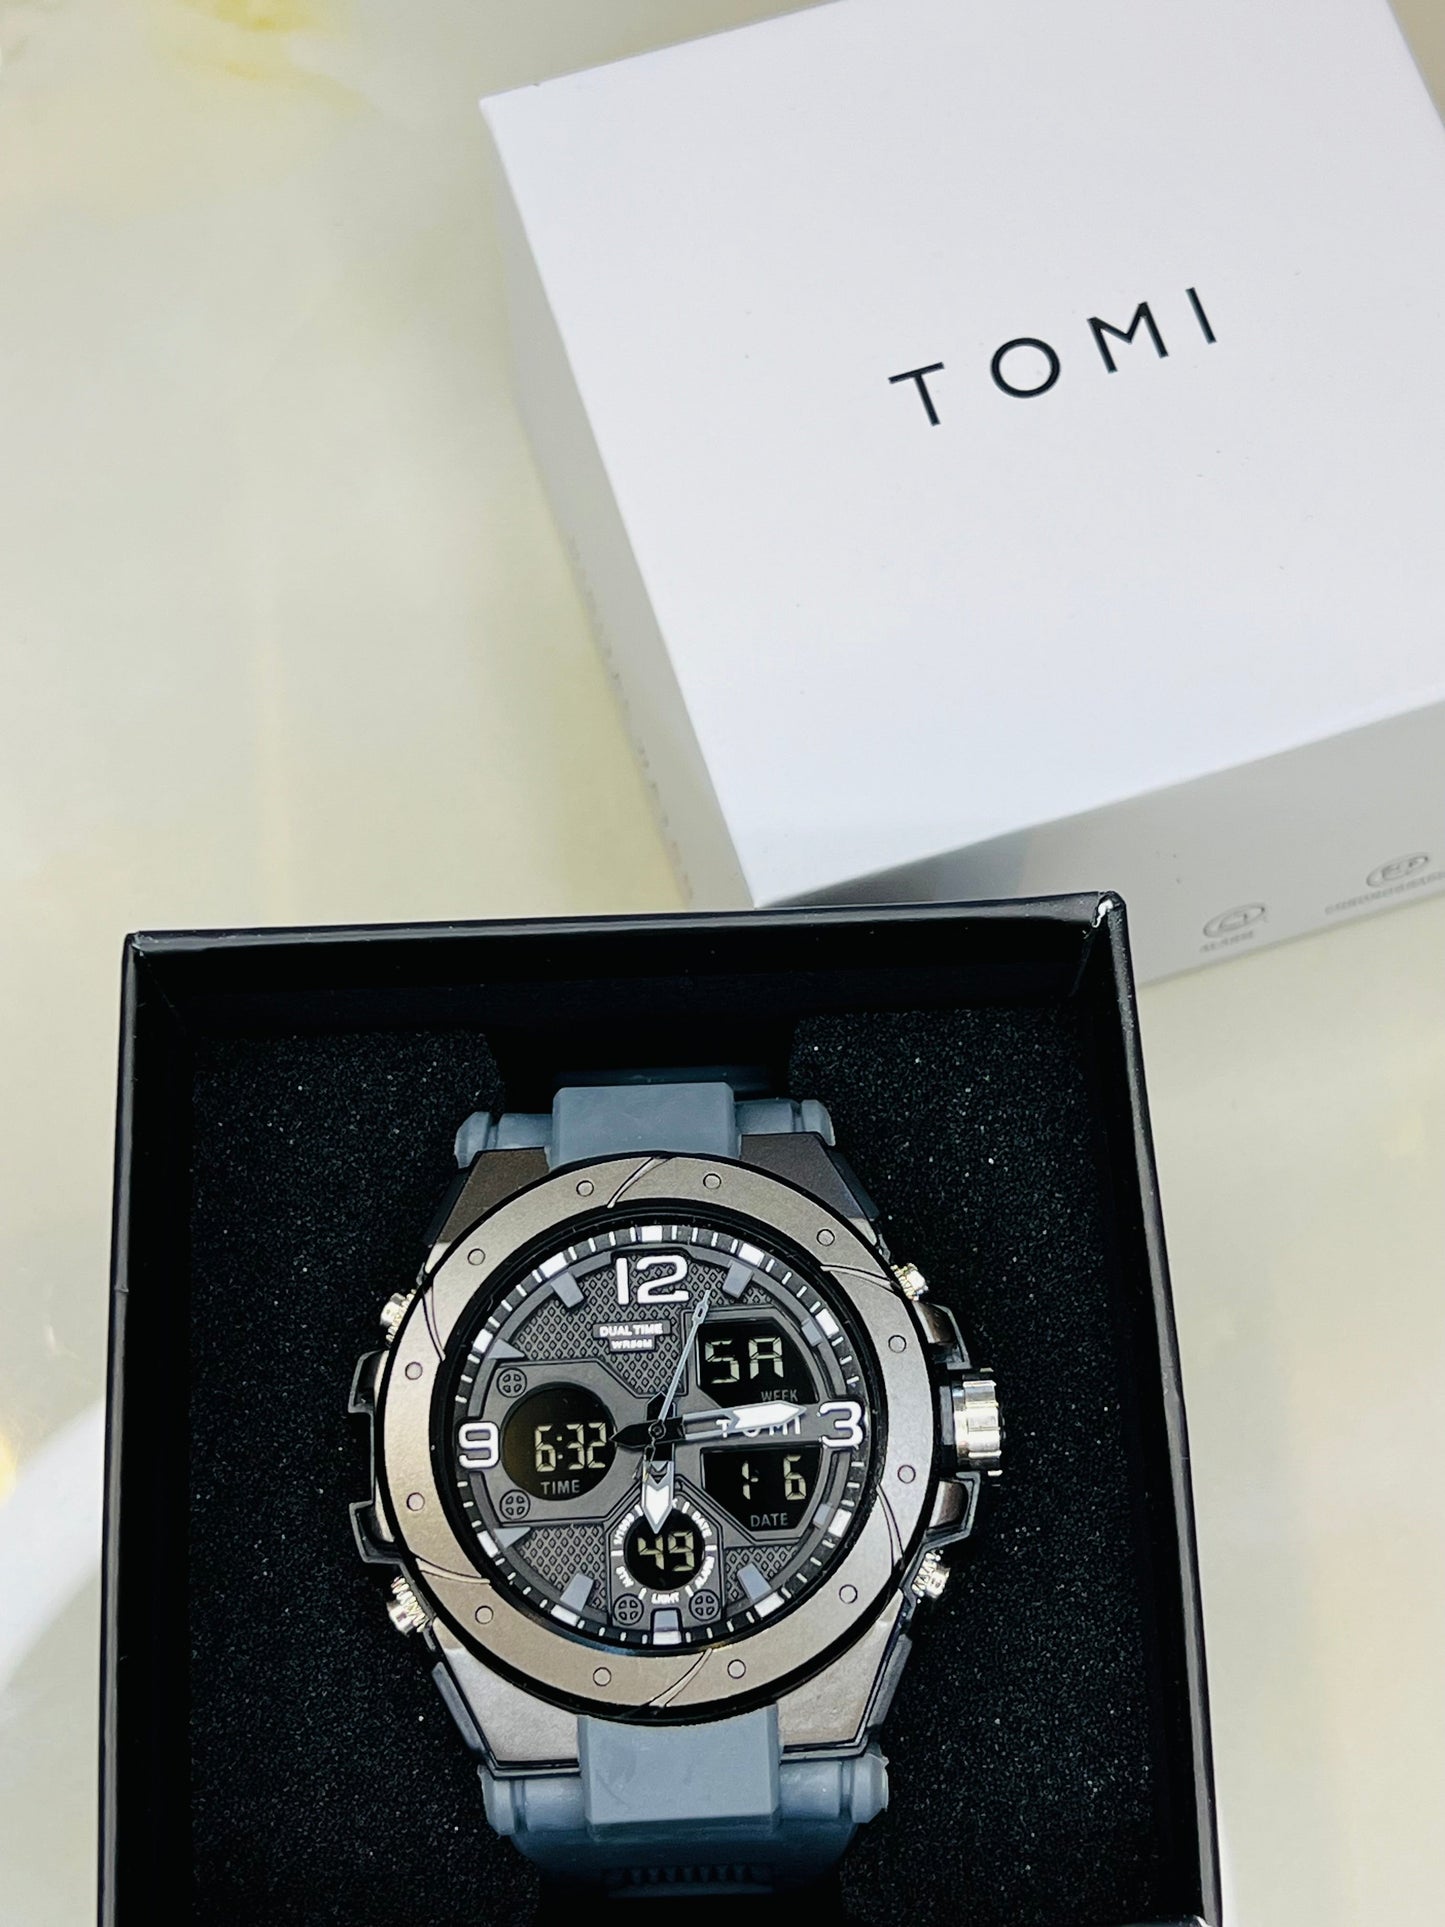 TOMI T-235 Sports Watch Dual Time Digital Analogue